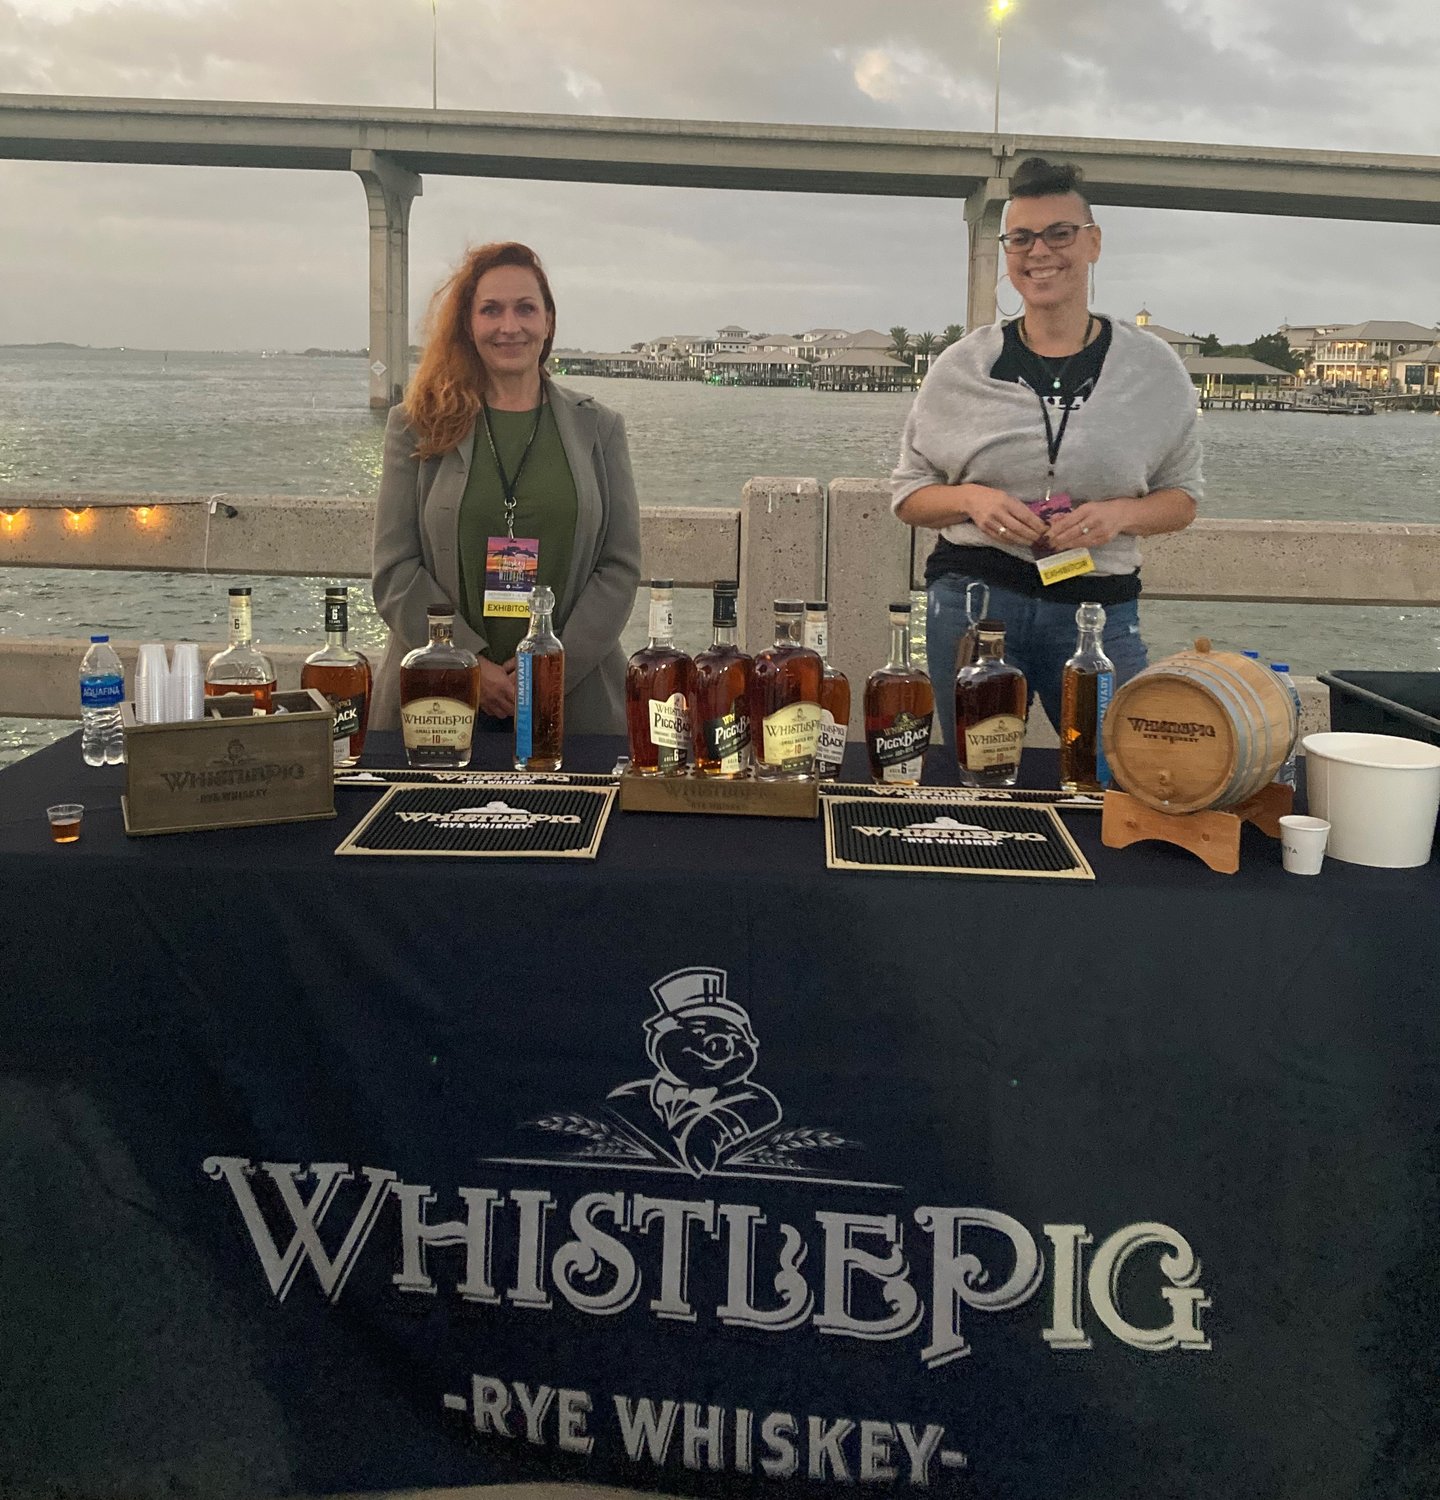 WhistlePig representative were on hand to tell visitors about their product.